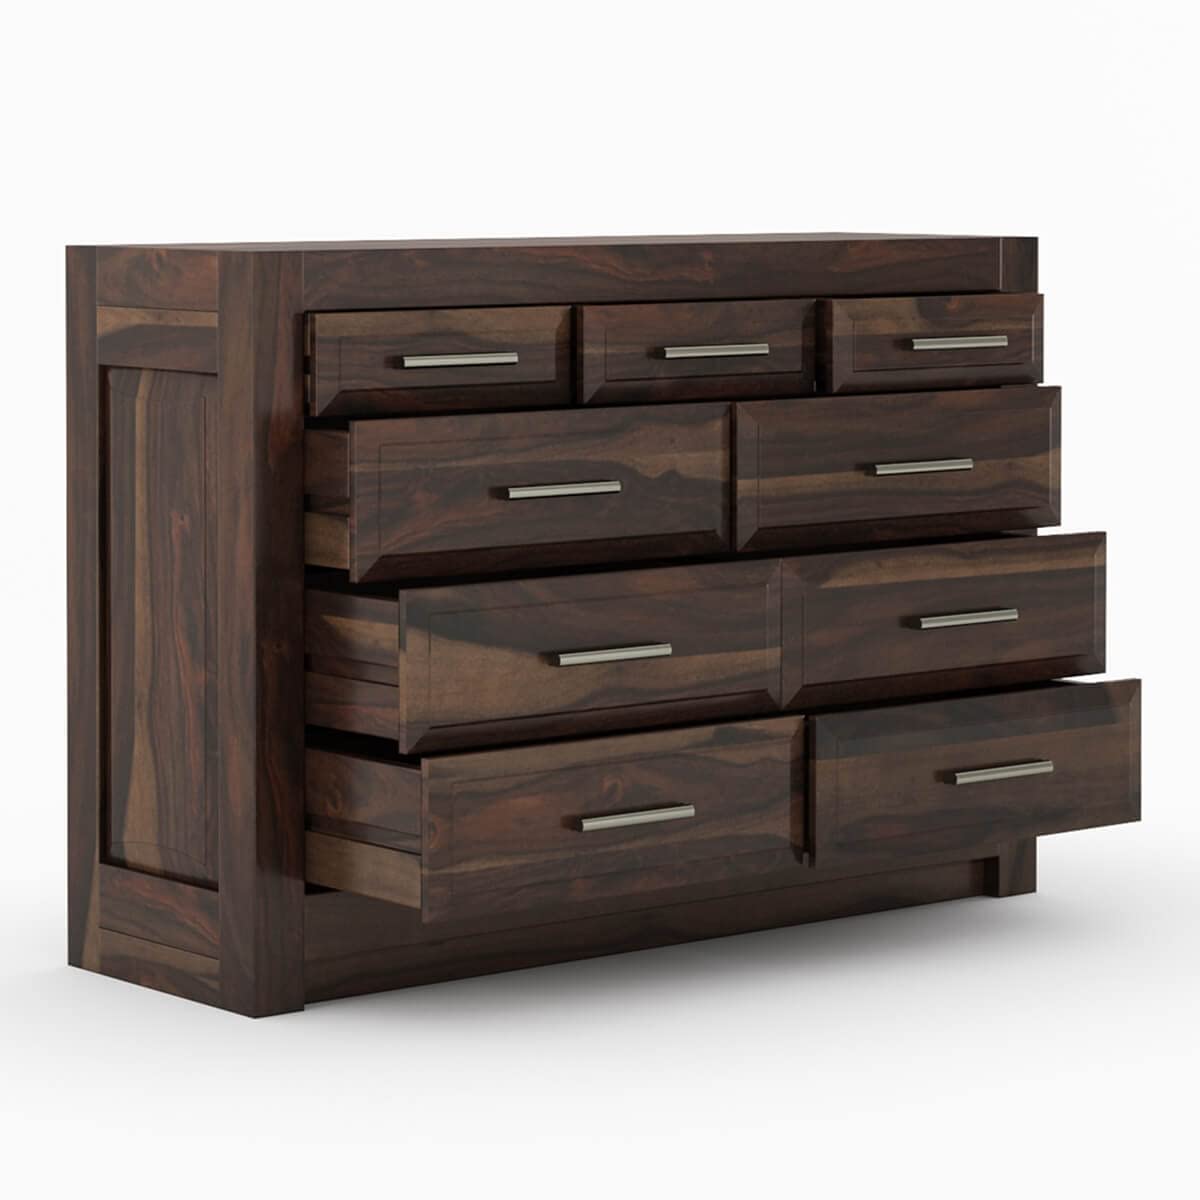 WoodMarwar Solid Sheesham Wood Chest of Drawer 10 Drawers Dresser for Home & Living Room